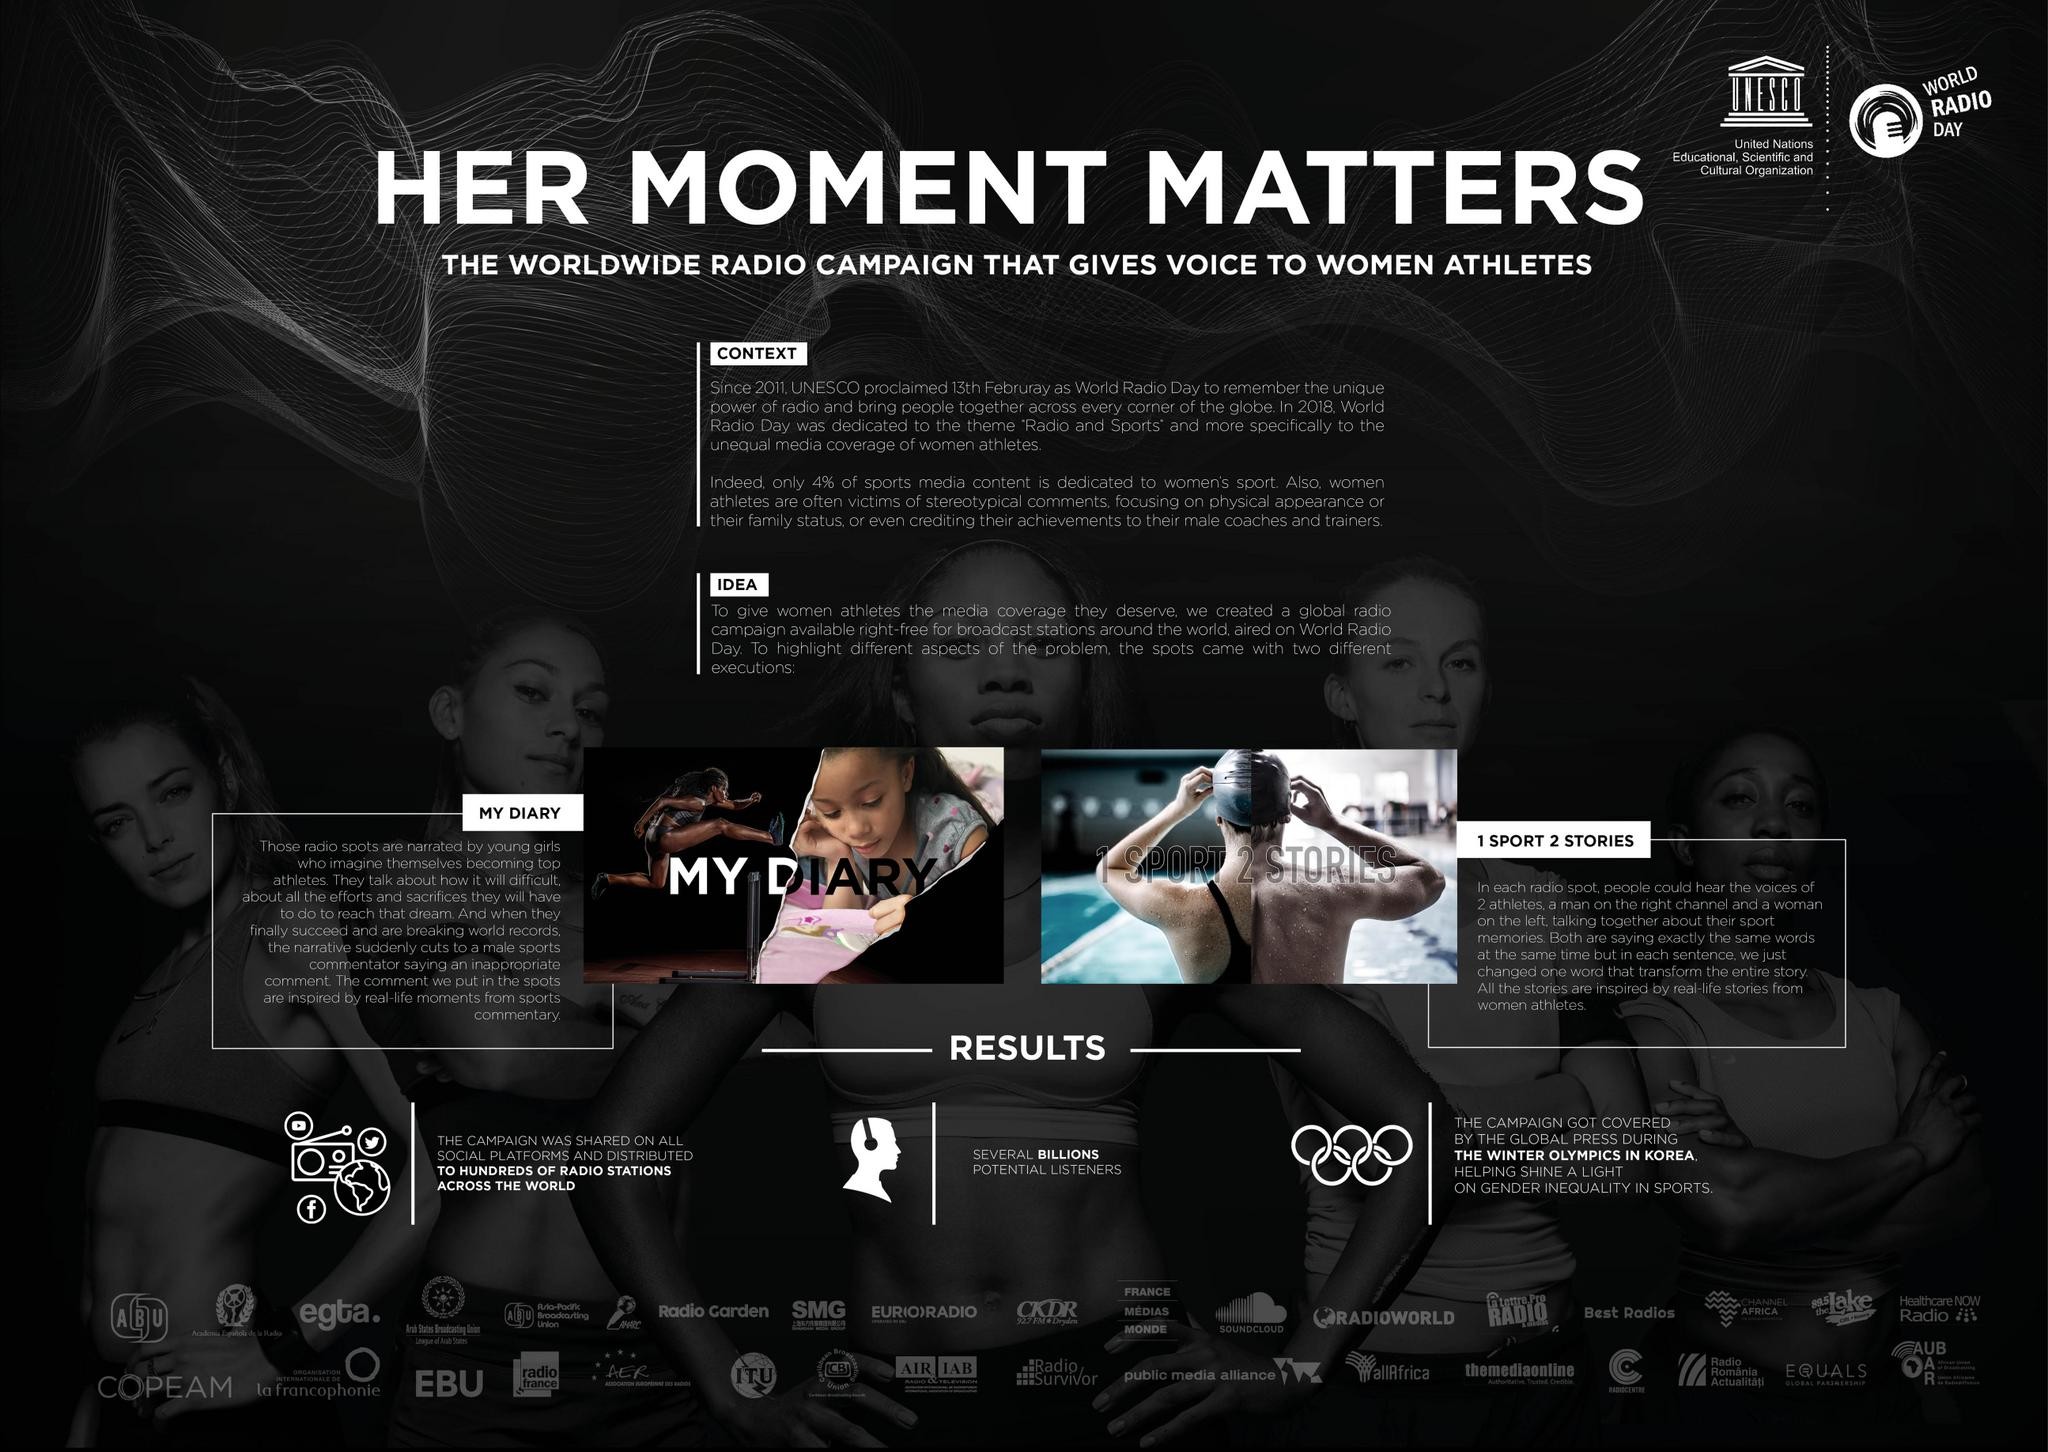 Her moment matters